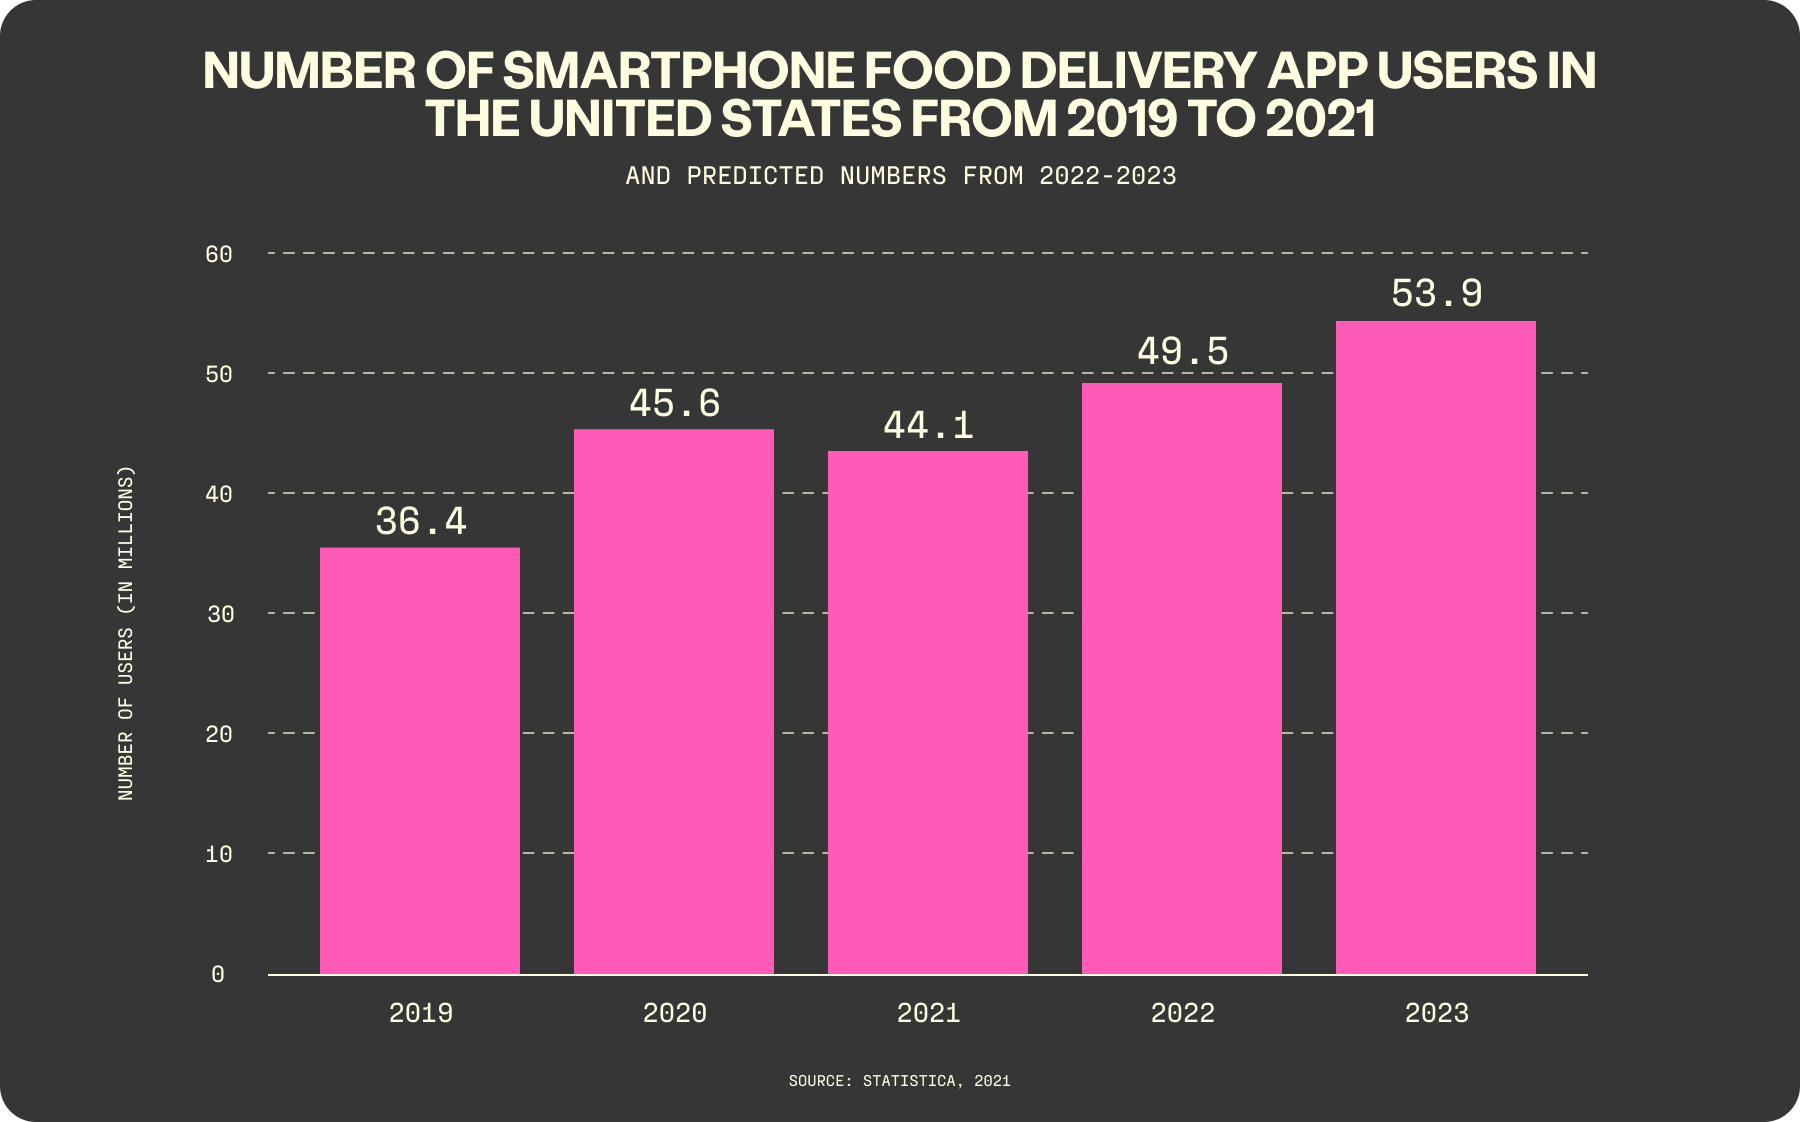 Number of smartphone food delivery app users in the United States from 2019 to 2021 and predicted numbers from 2022-2023.